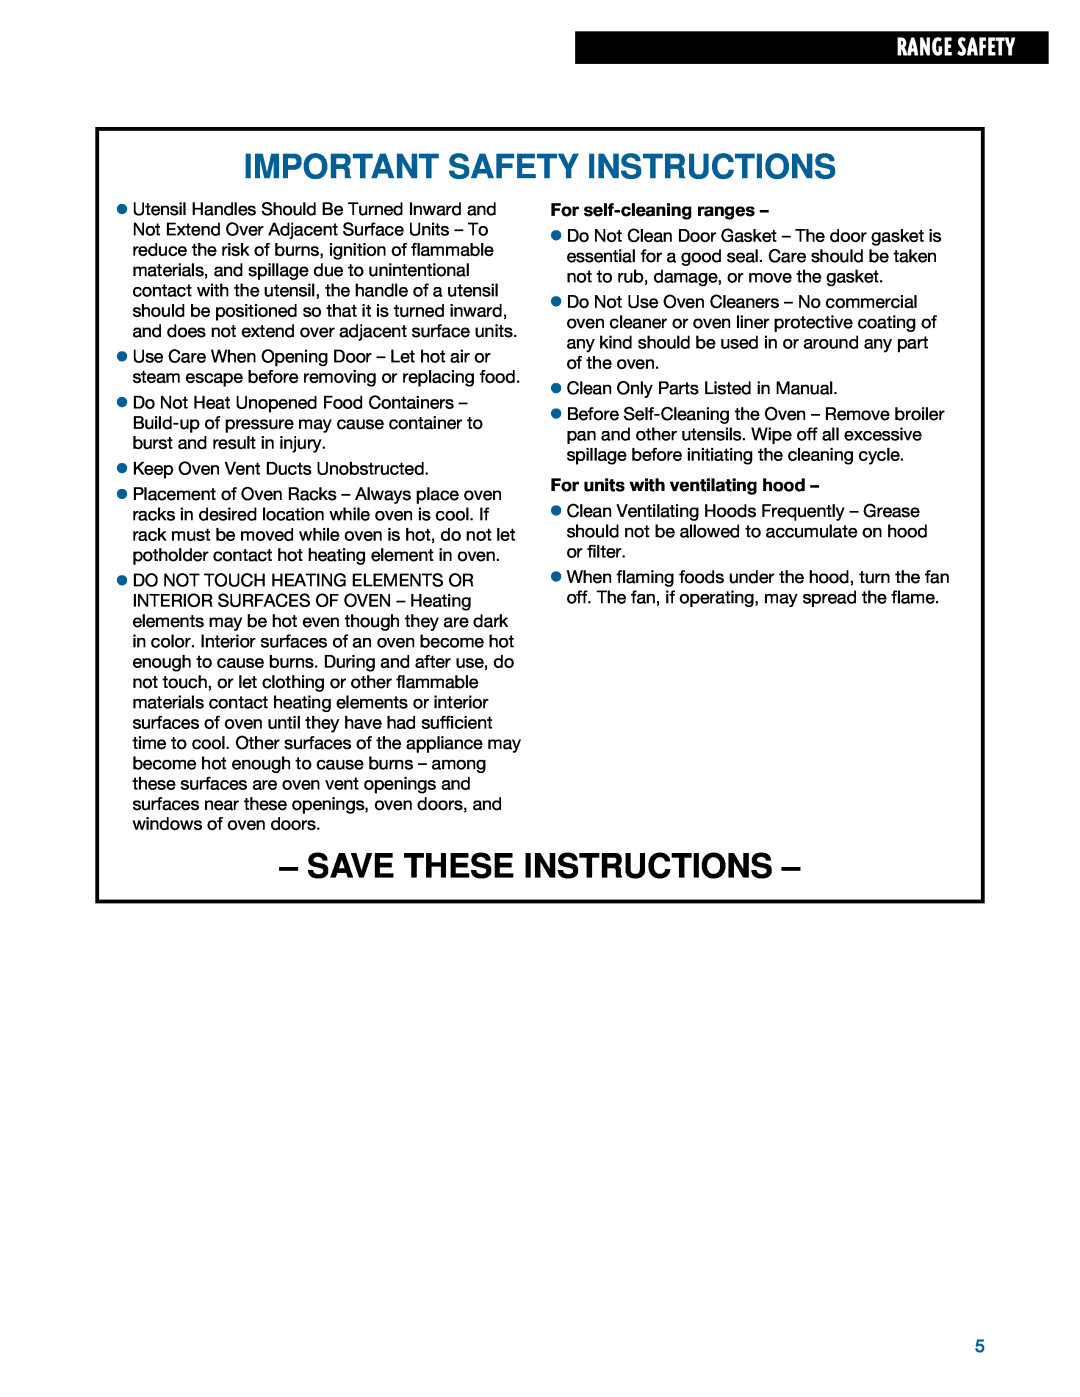 Whirlpool TGS325E manual Important Safety Instructions, Save These Instructions, Range Safety, For self-cleaningranges 